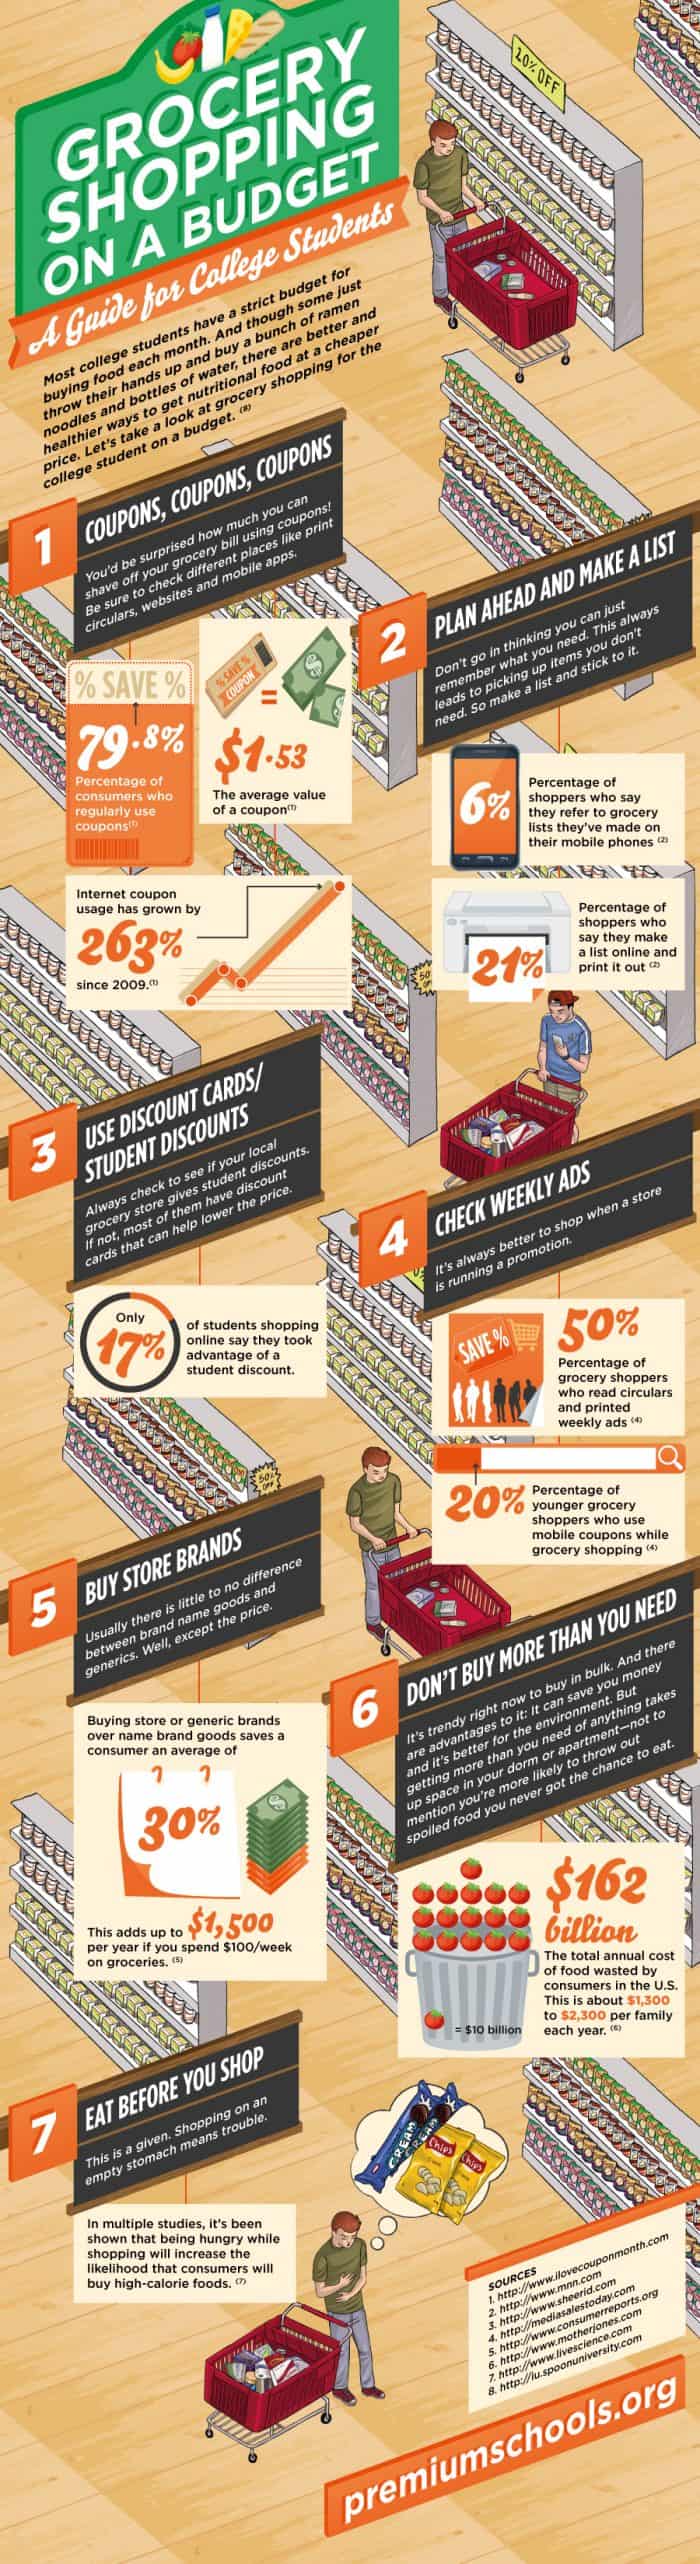 Budget Grocery Shopping for College Students Infographic